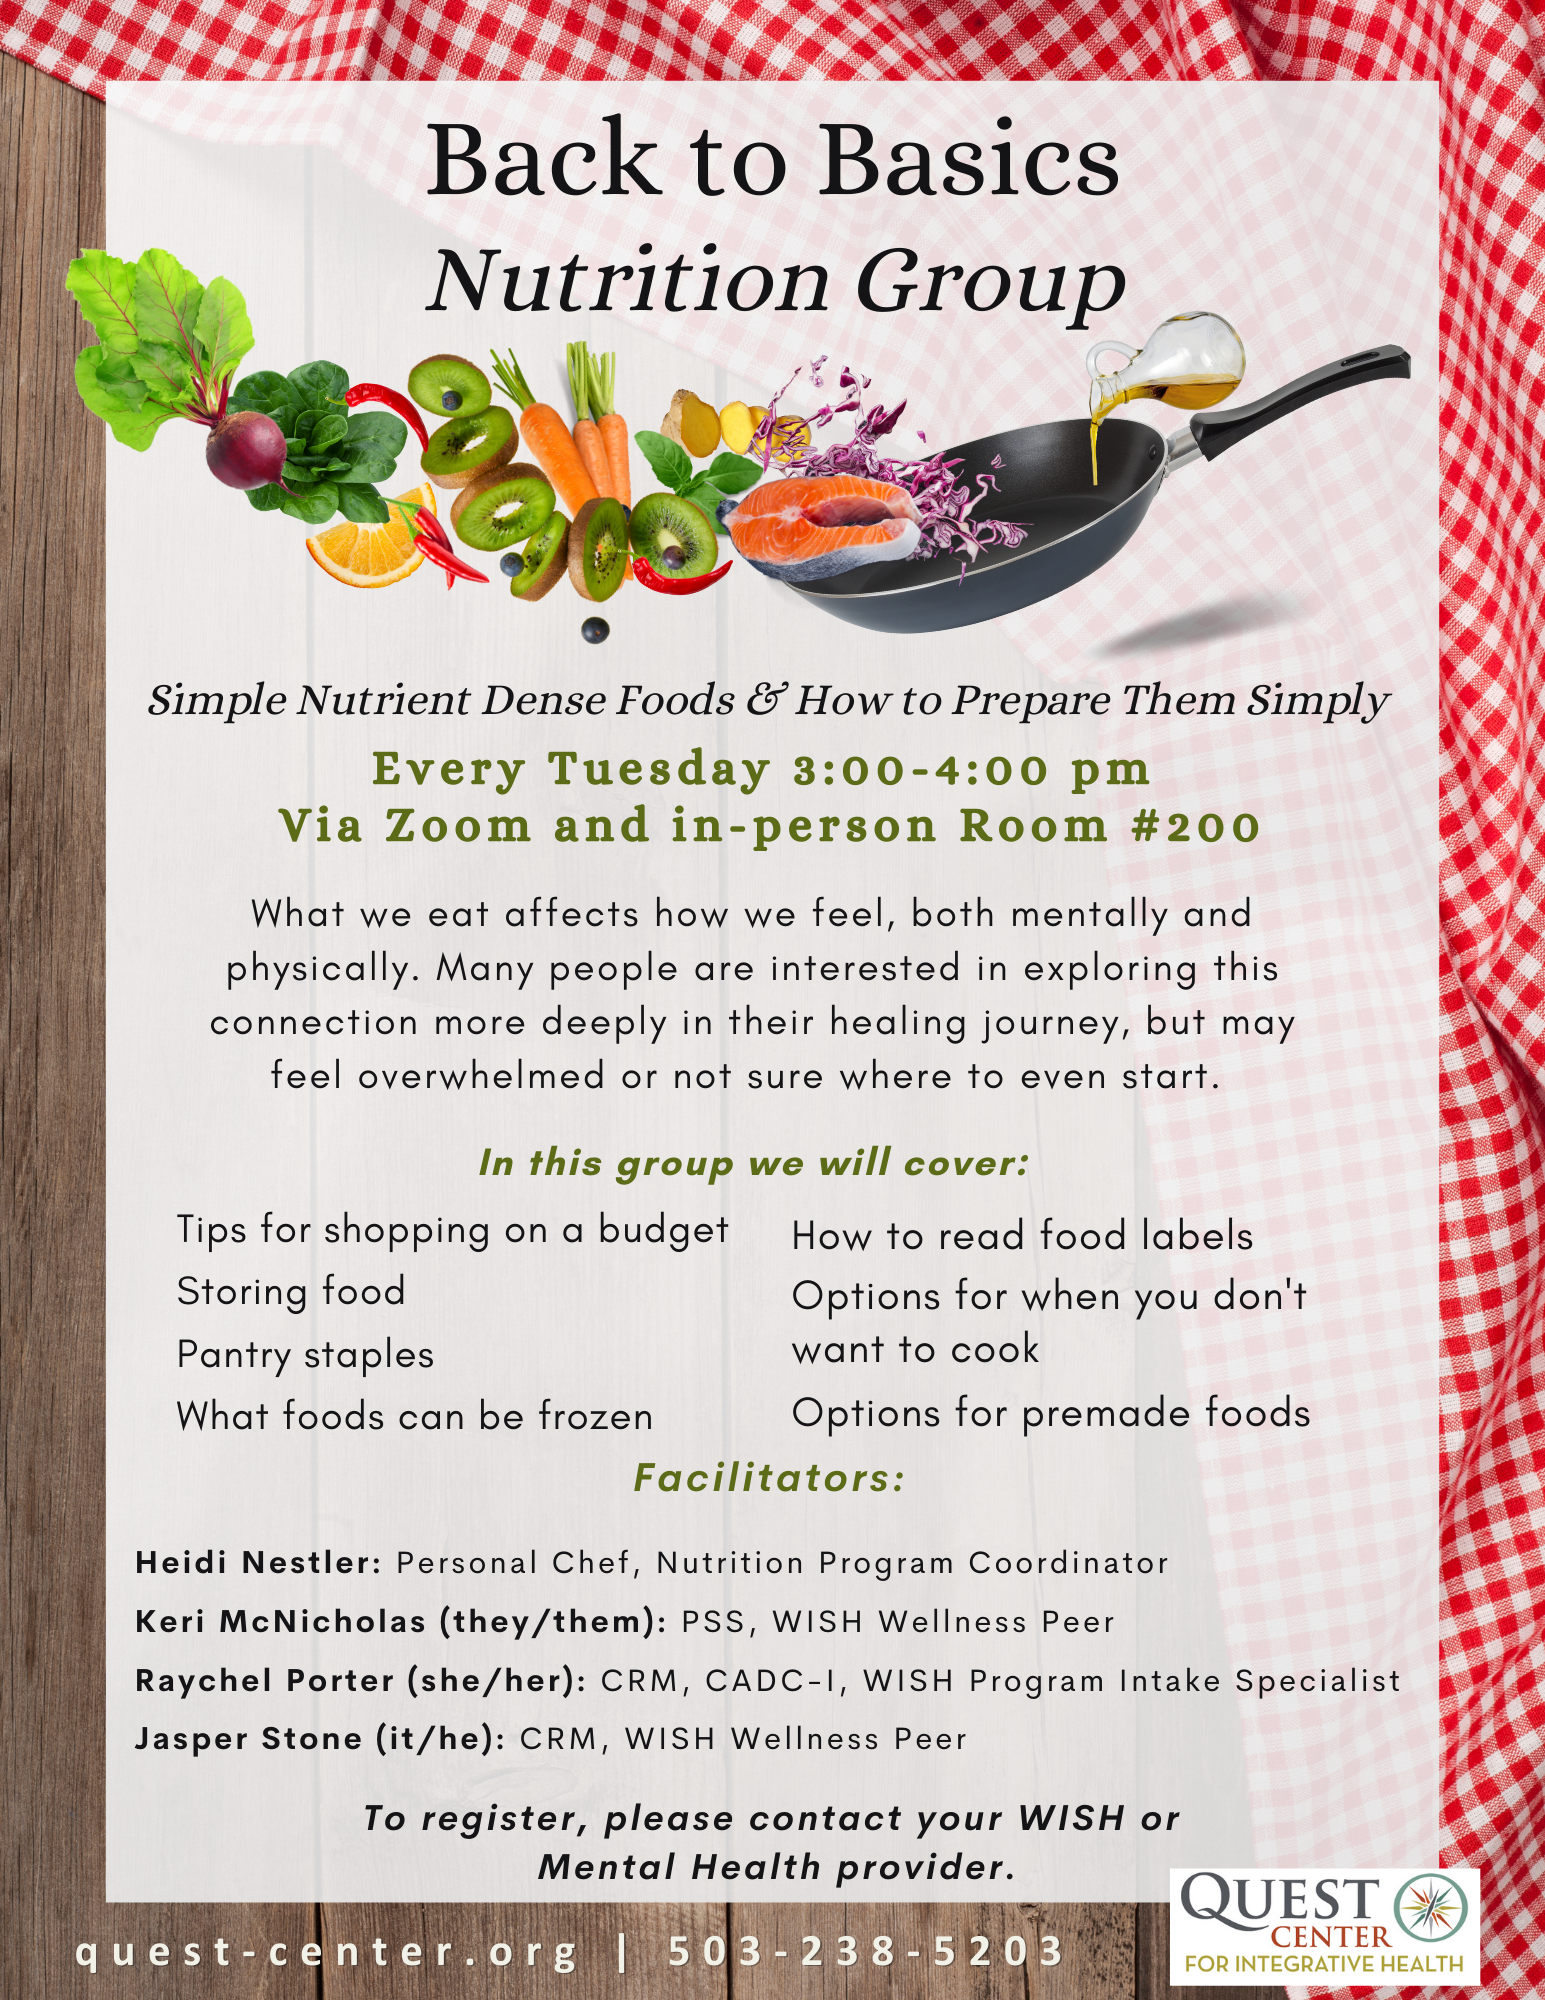 Back to Basics Nutrition Group — Quest Center for Integrative Health